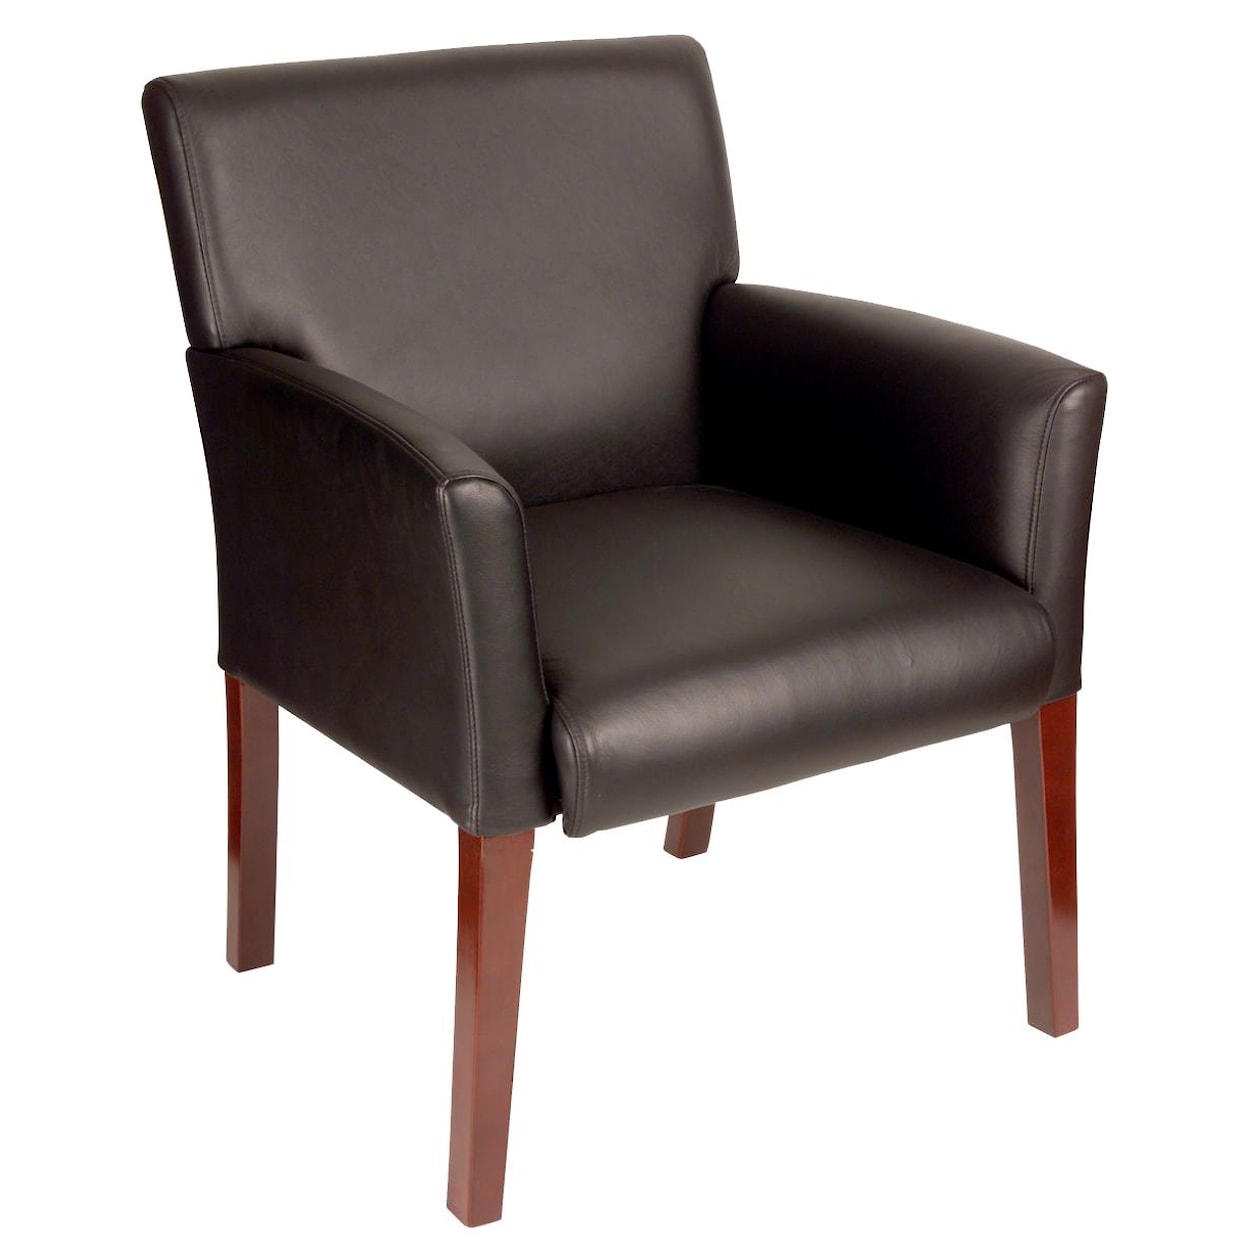 Presidential Seating Office Side Chairs Urban Guest Chair